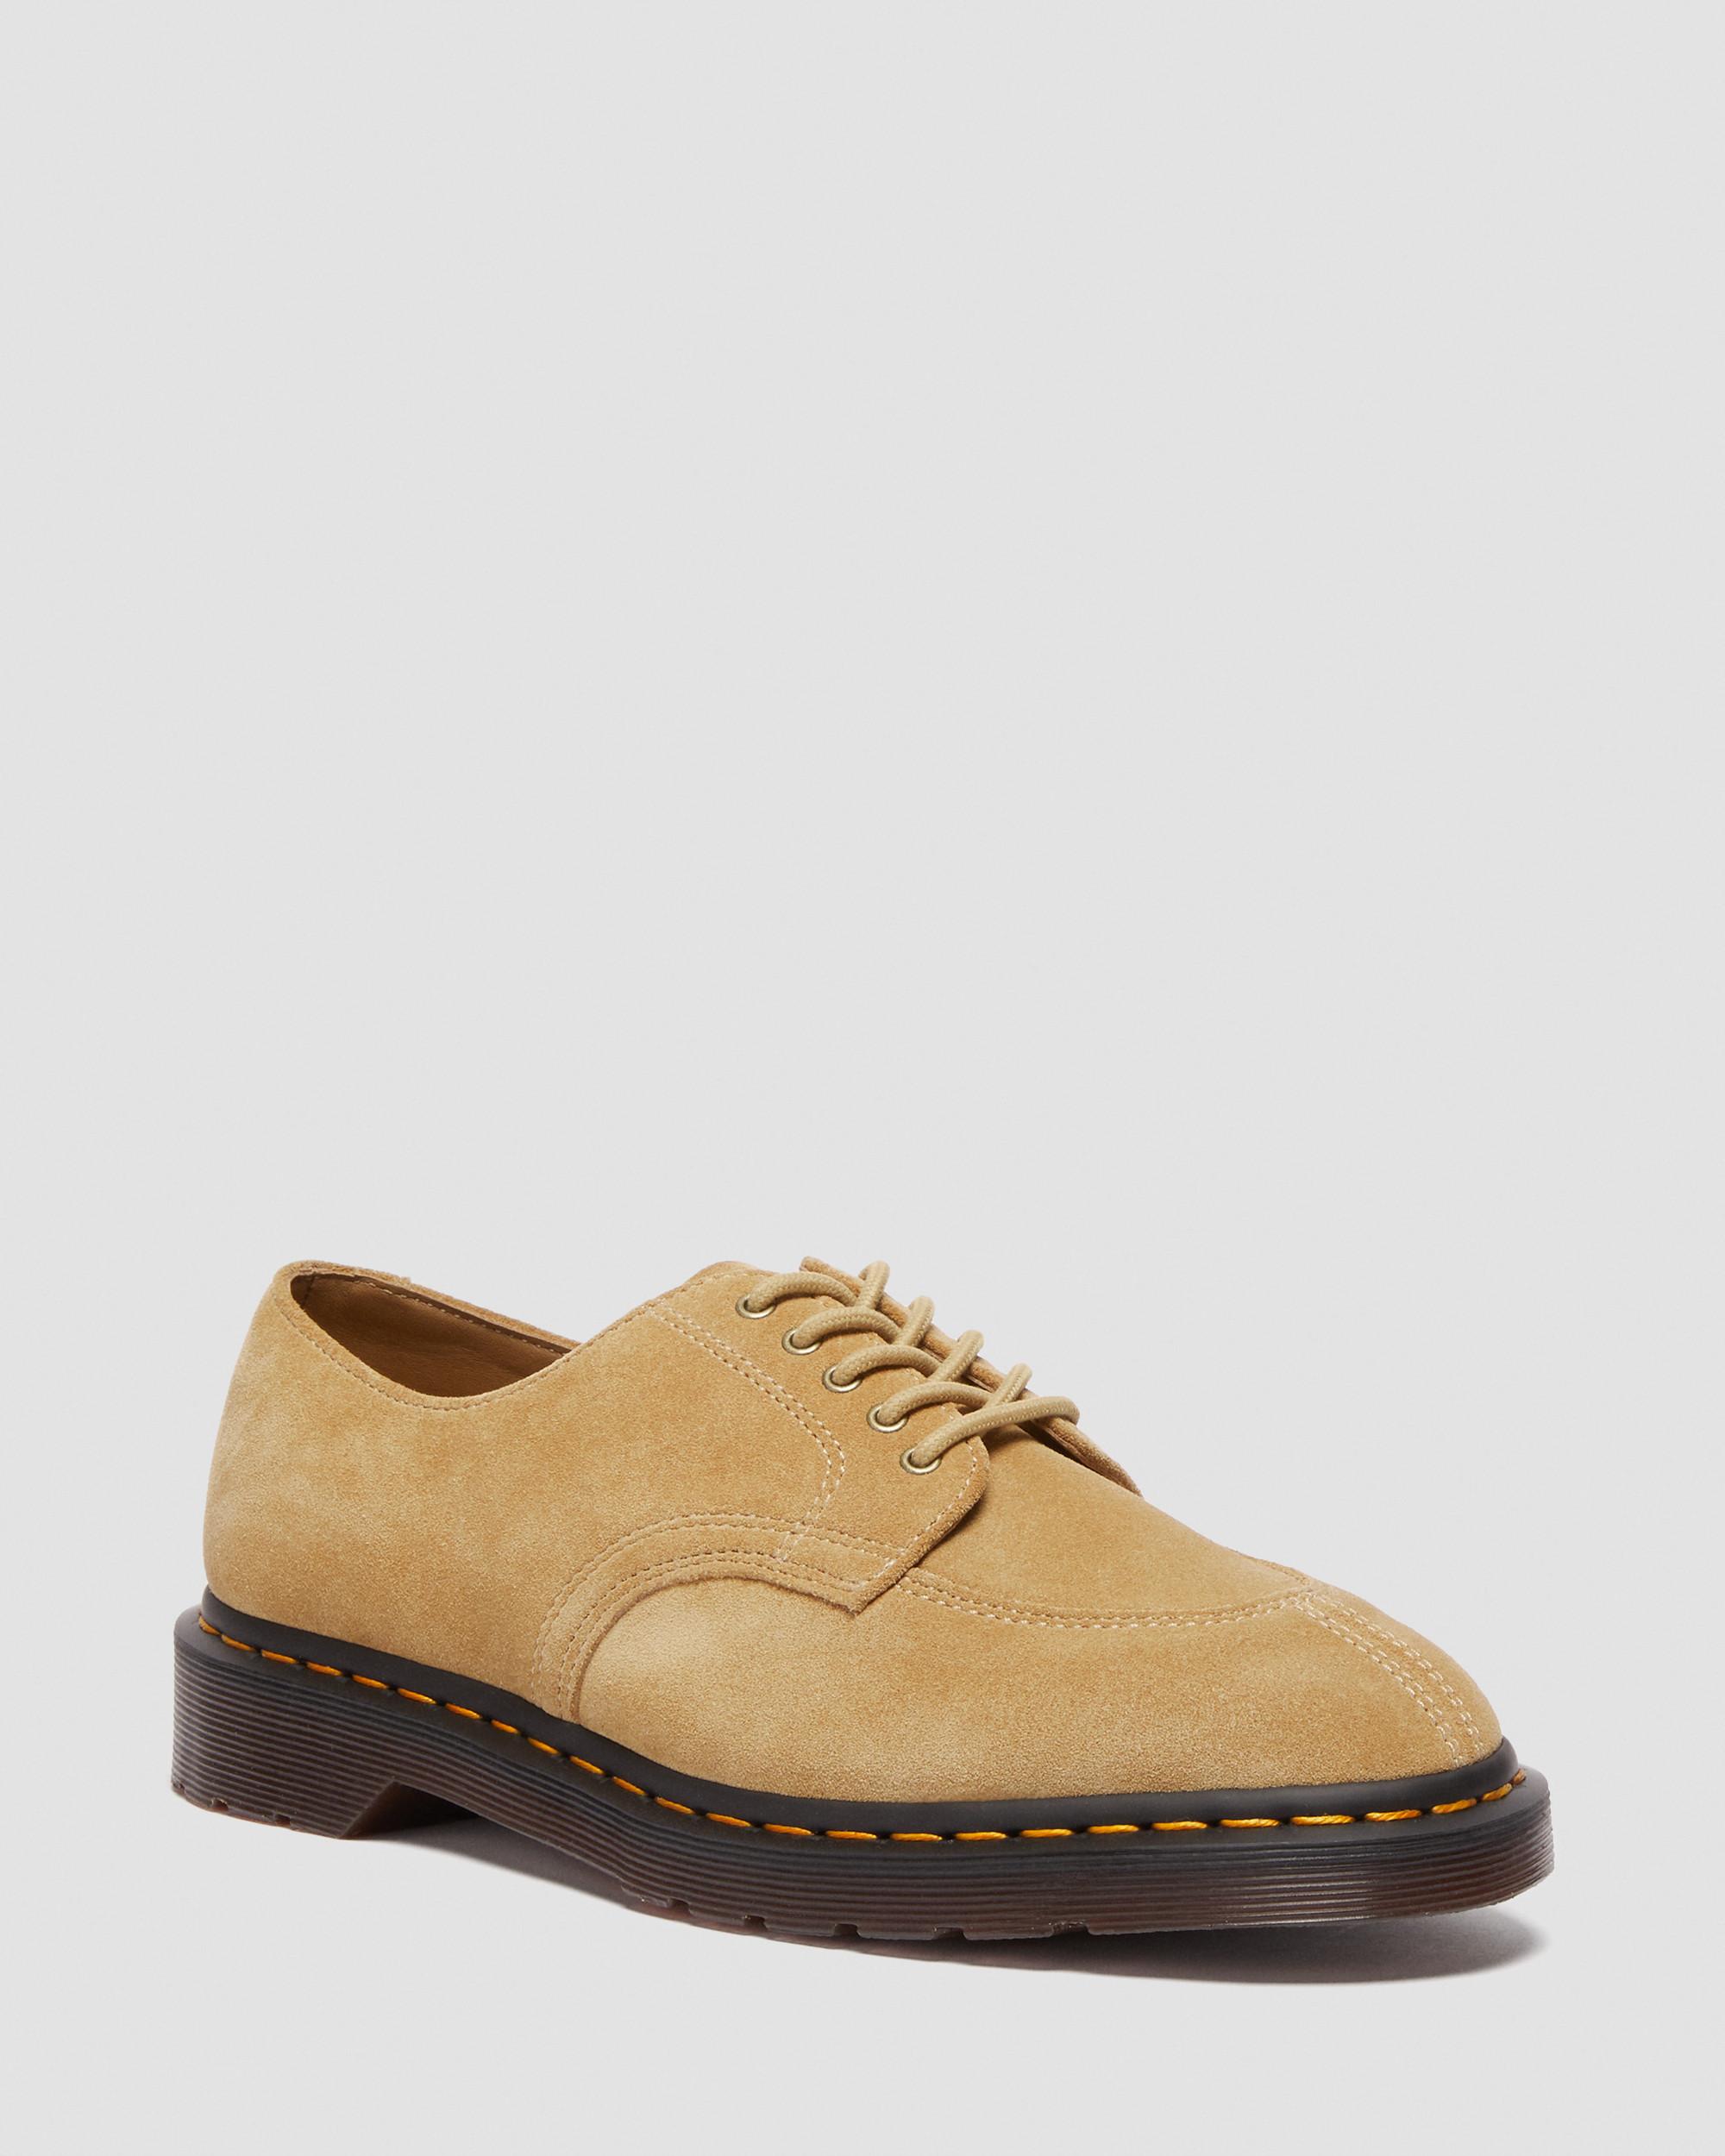 2046 Suede Shoes in Sand | Dr. Martens